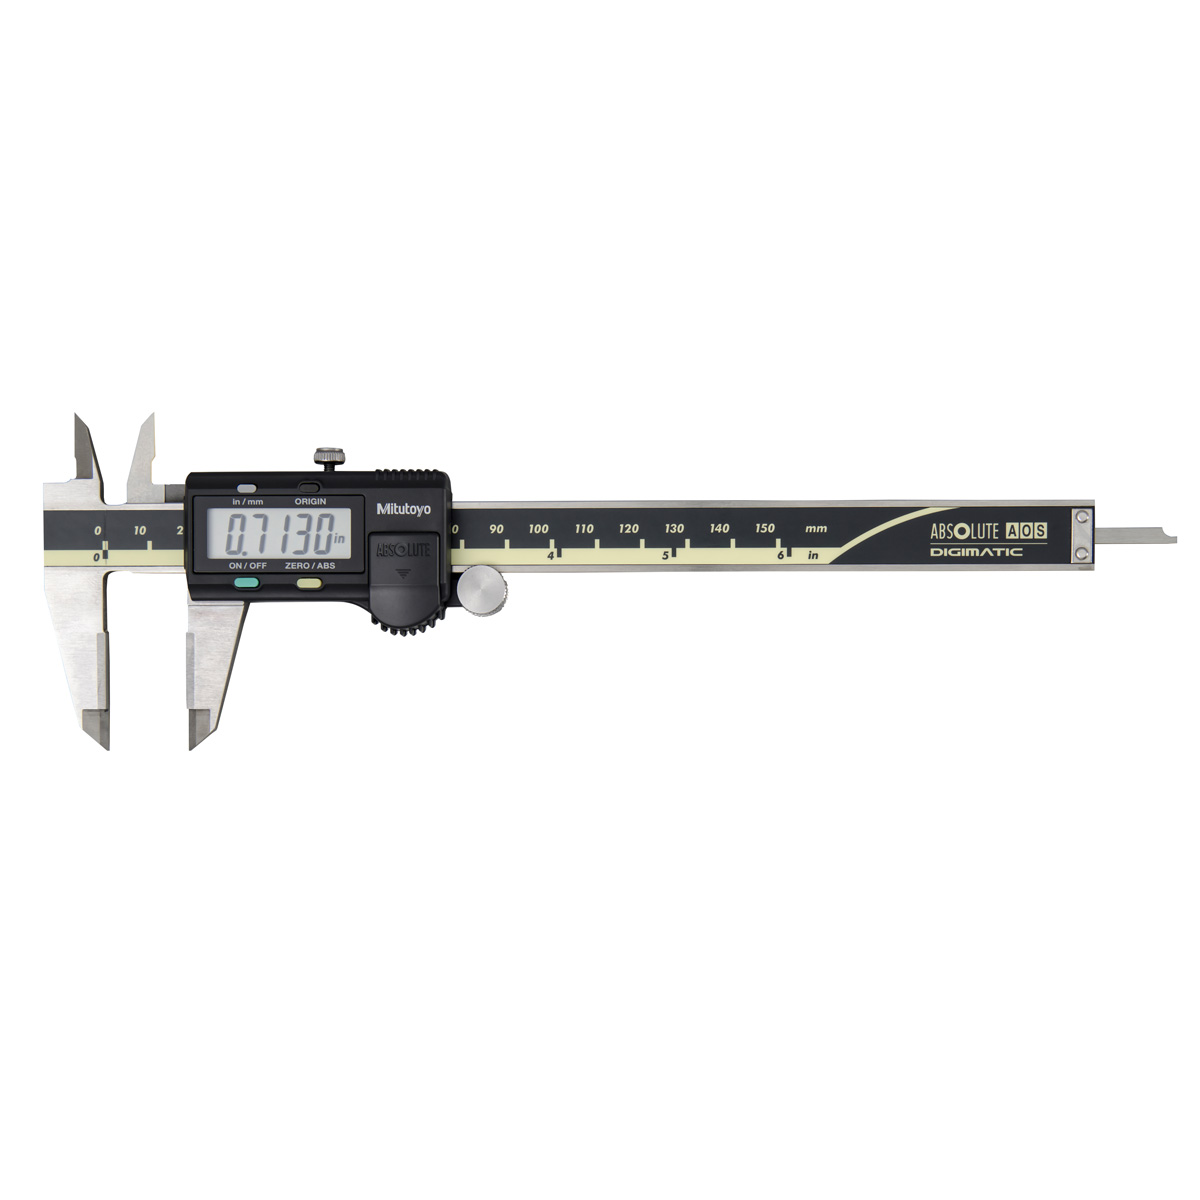 Picture of Mitutoyo 500-159-30 0-6 in. Digimatic AOS Absolute Caliper with Range Outdoor Jaw